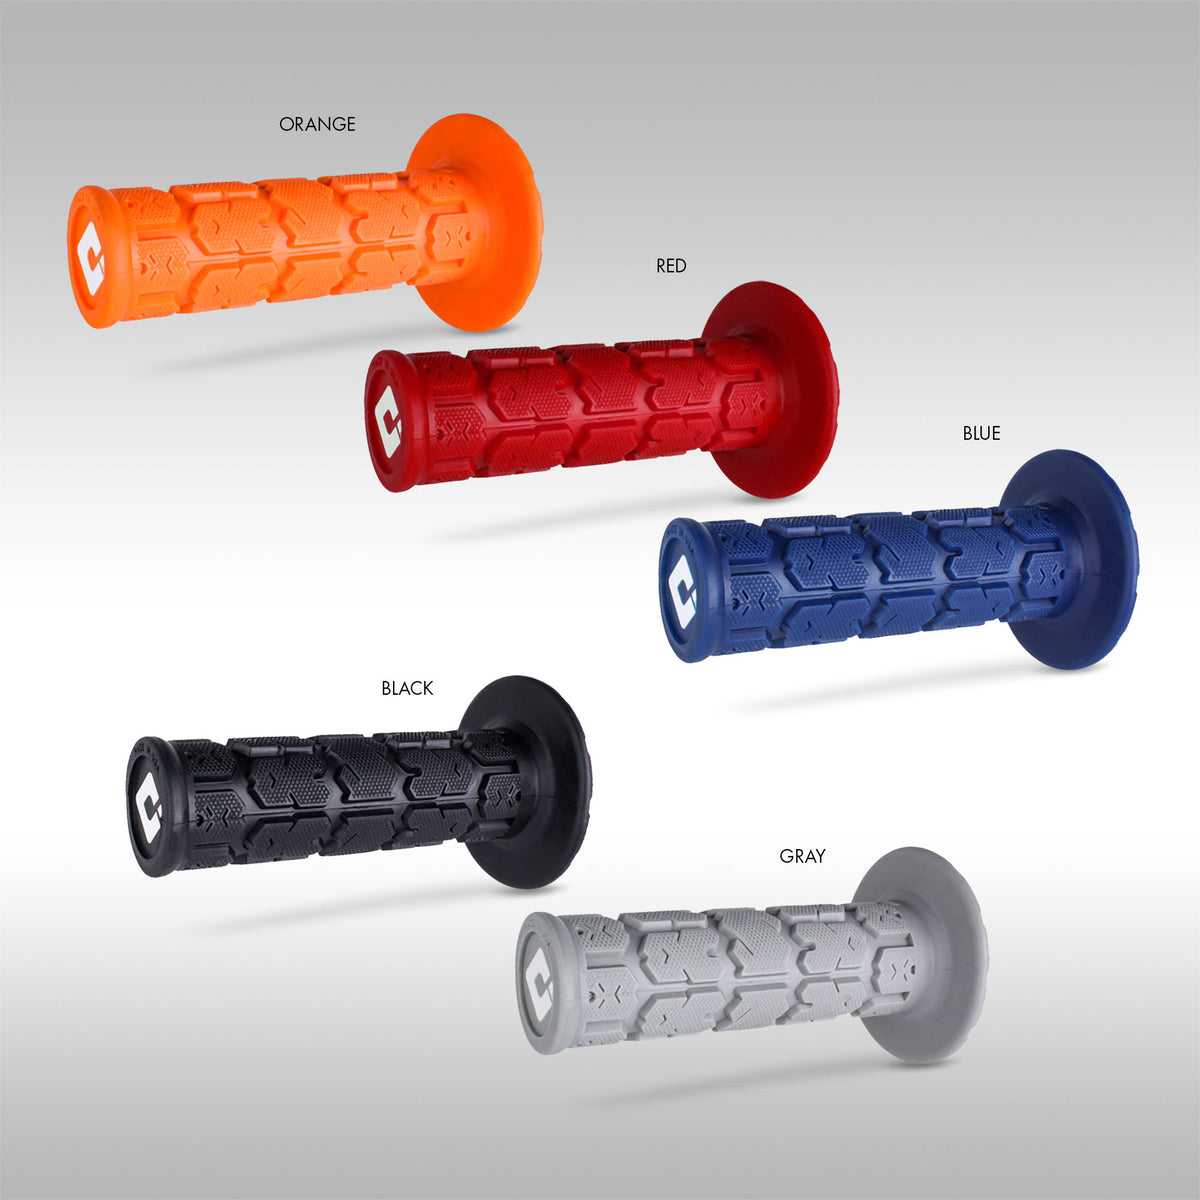 ODI single ply ROGUE motorcycle grips. Slightly larger profile for more comfort and control. Dirtbike, enduro, dualsport, motocross grips that are made in the USA. All 5 colors